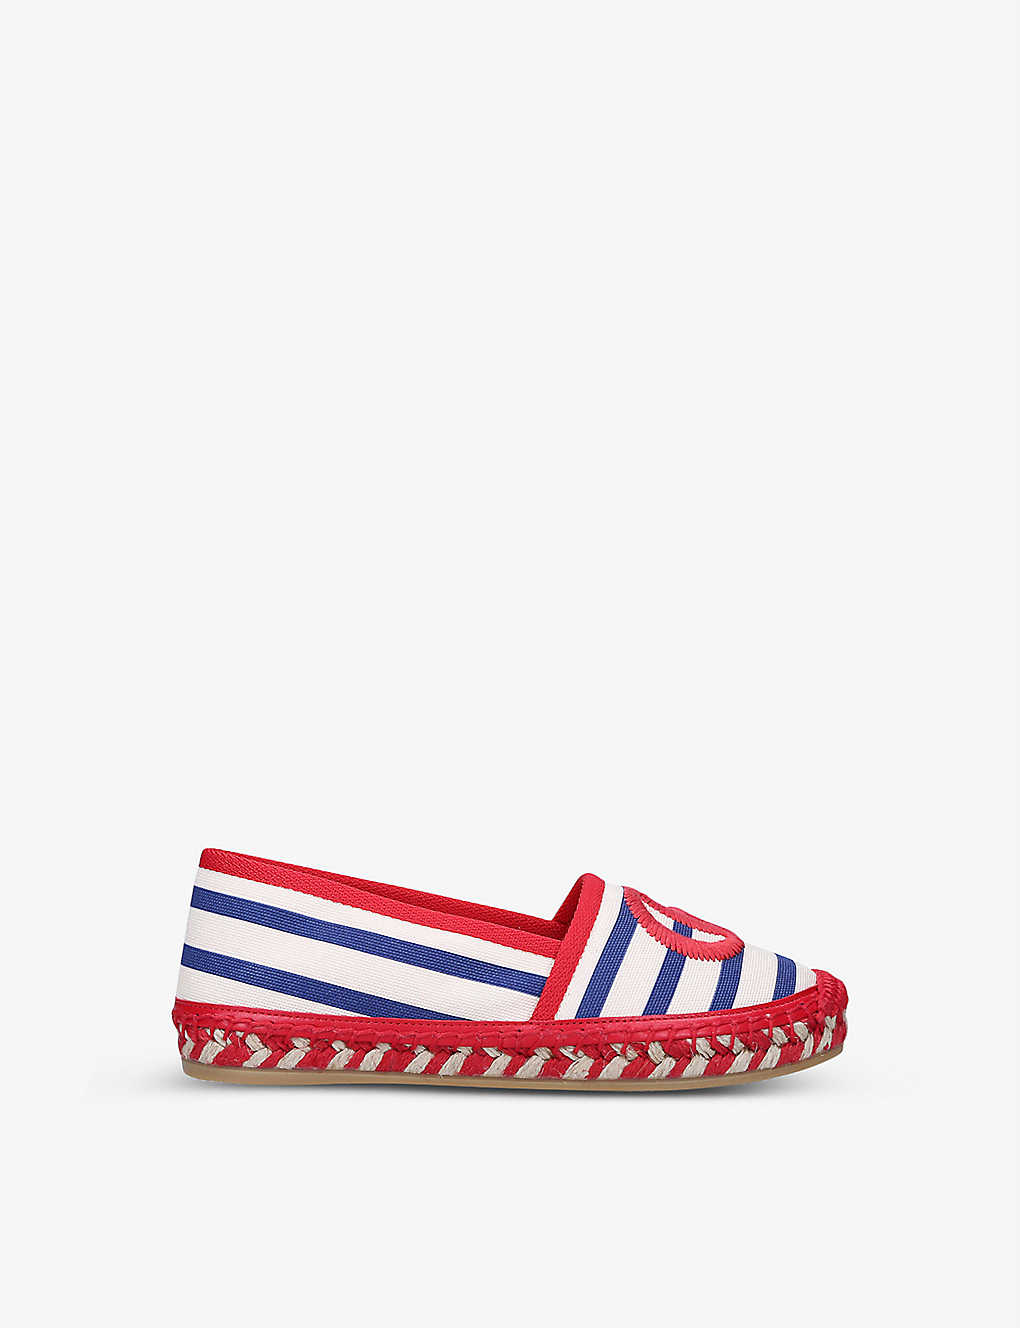 Striped logo-embroidered canvas espadrilles 4-8 years Selfridges & Co Girls Shoes Espadrilles 